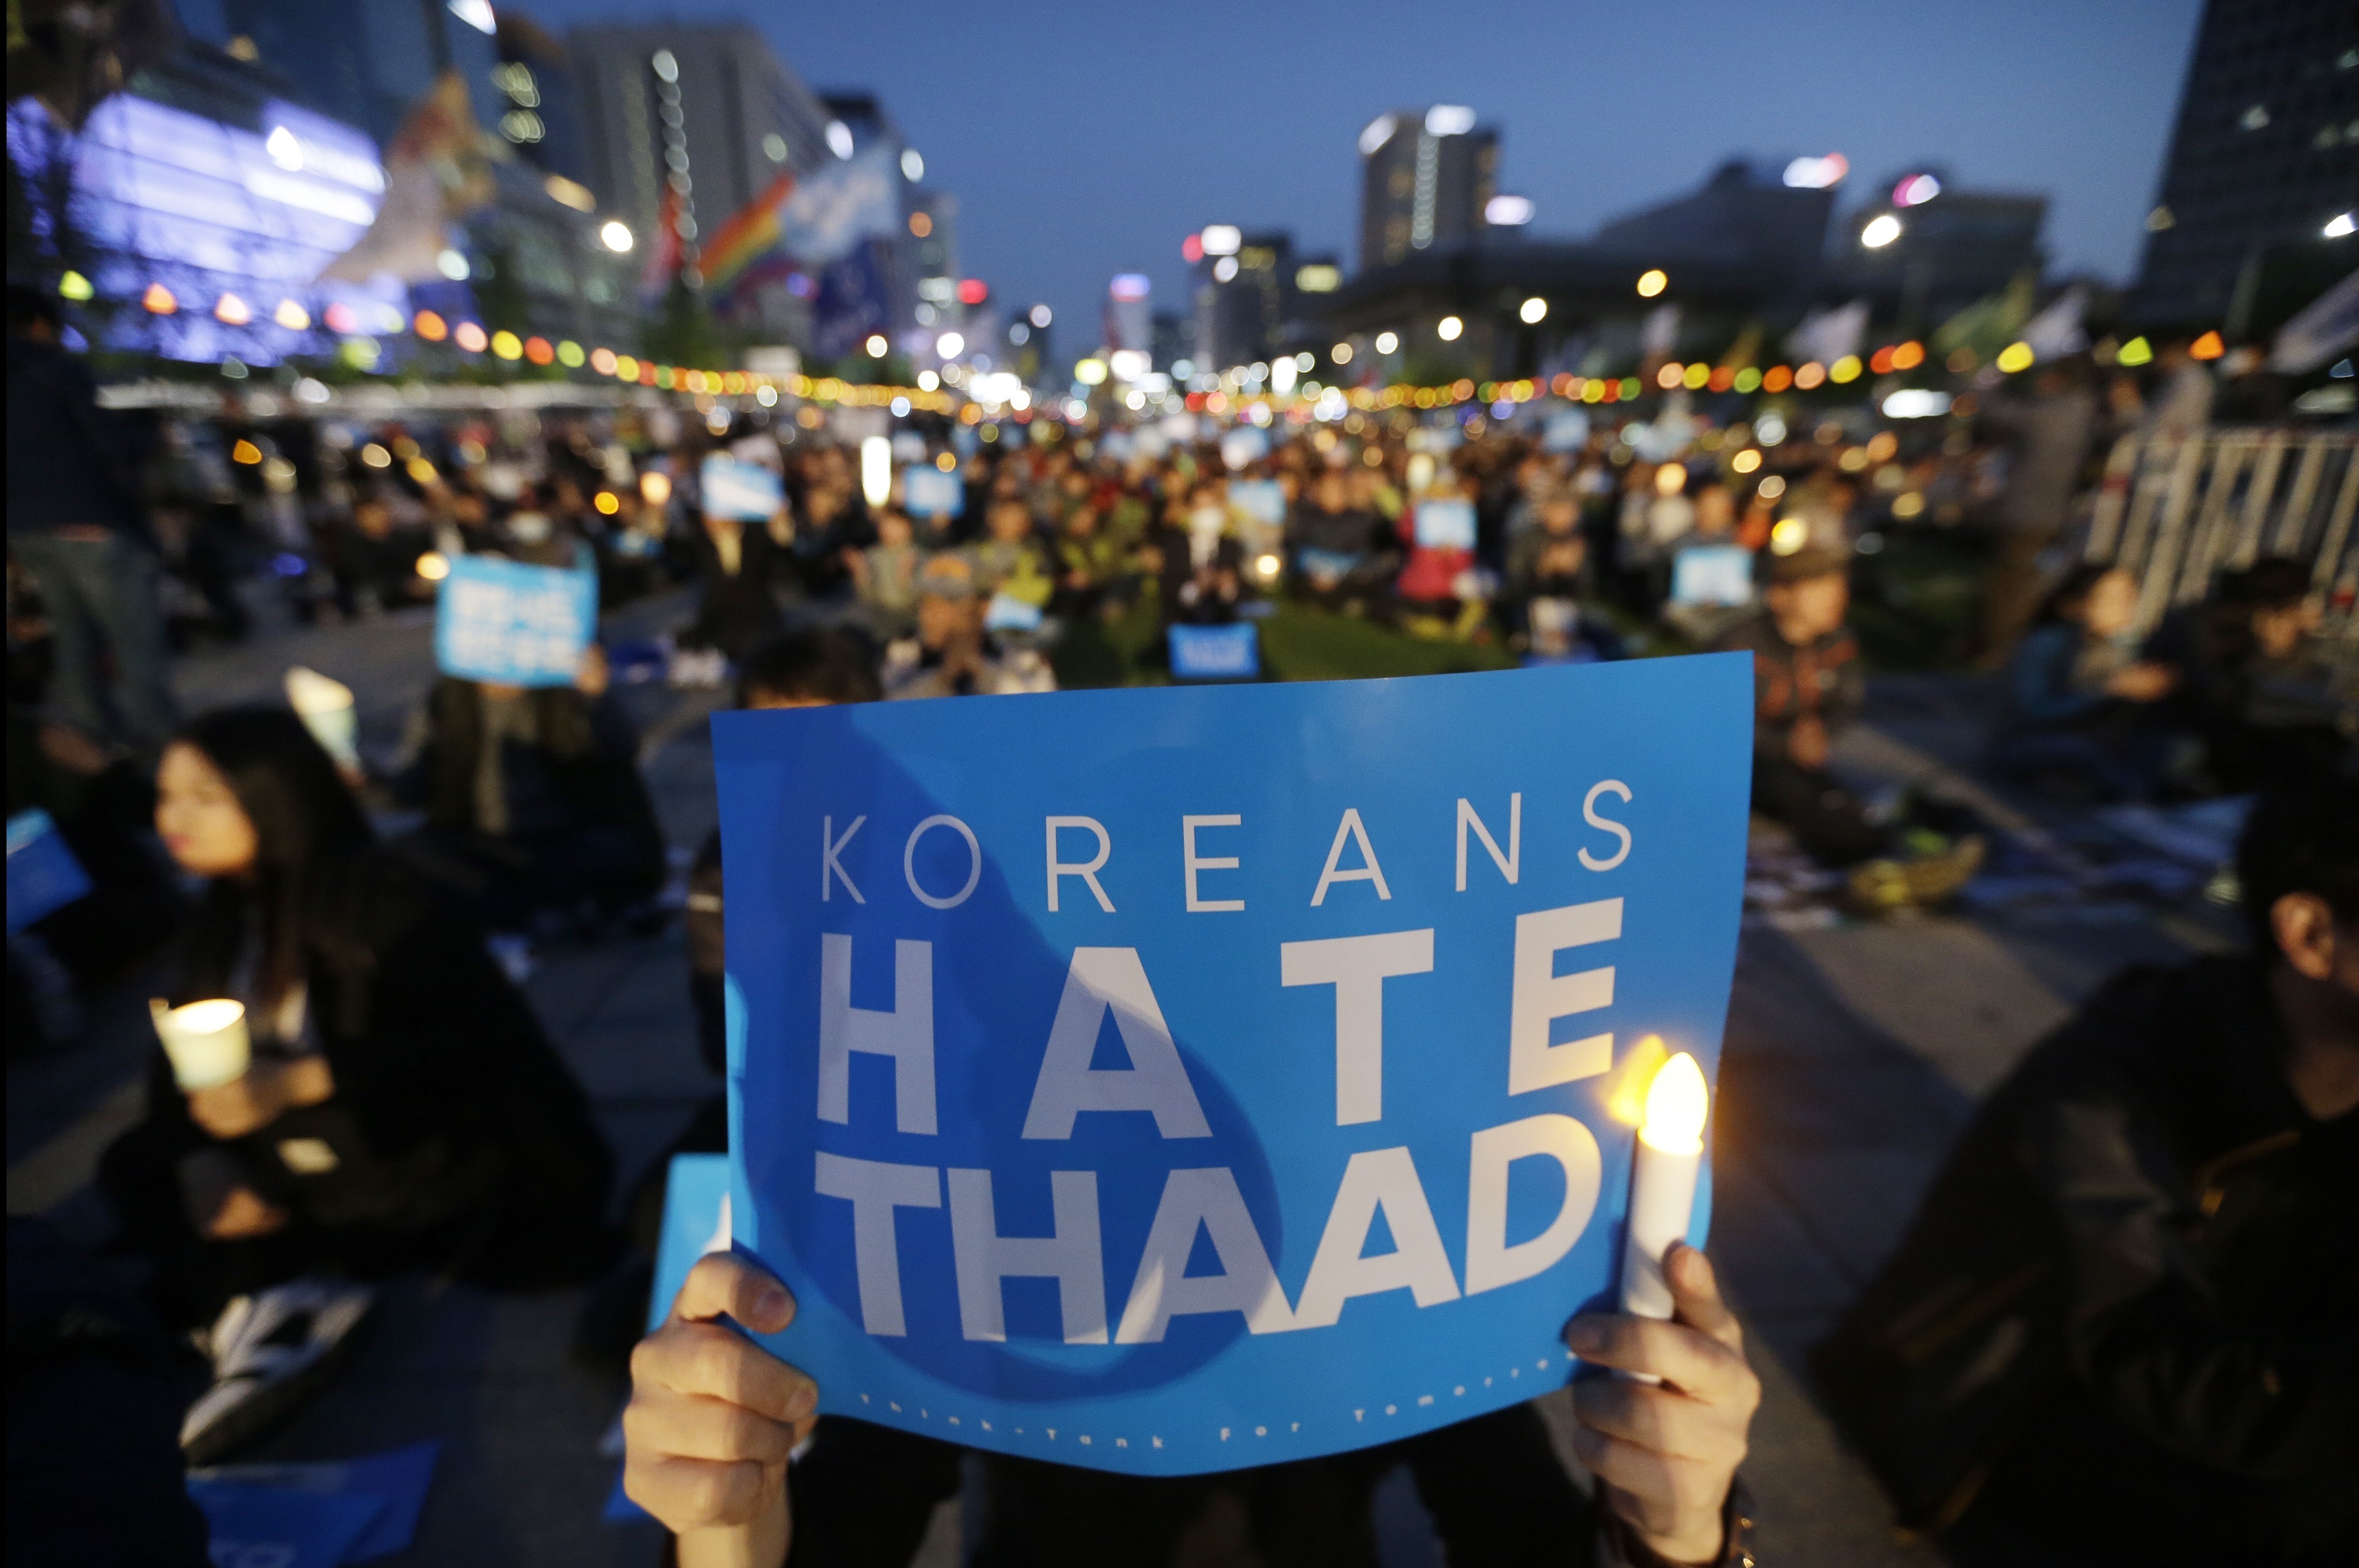 South Korean protesters stage a rally to oppose a plan to deploy the advanced U.S. missile defense system called Terminal High-Altitude Area Defense, or THAAD, near U.S. Embassy in Seoul, South Korea, Saturday, April 29, 2017. (Ahn Young-joon—AP)